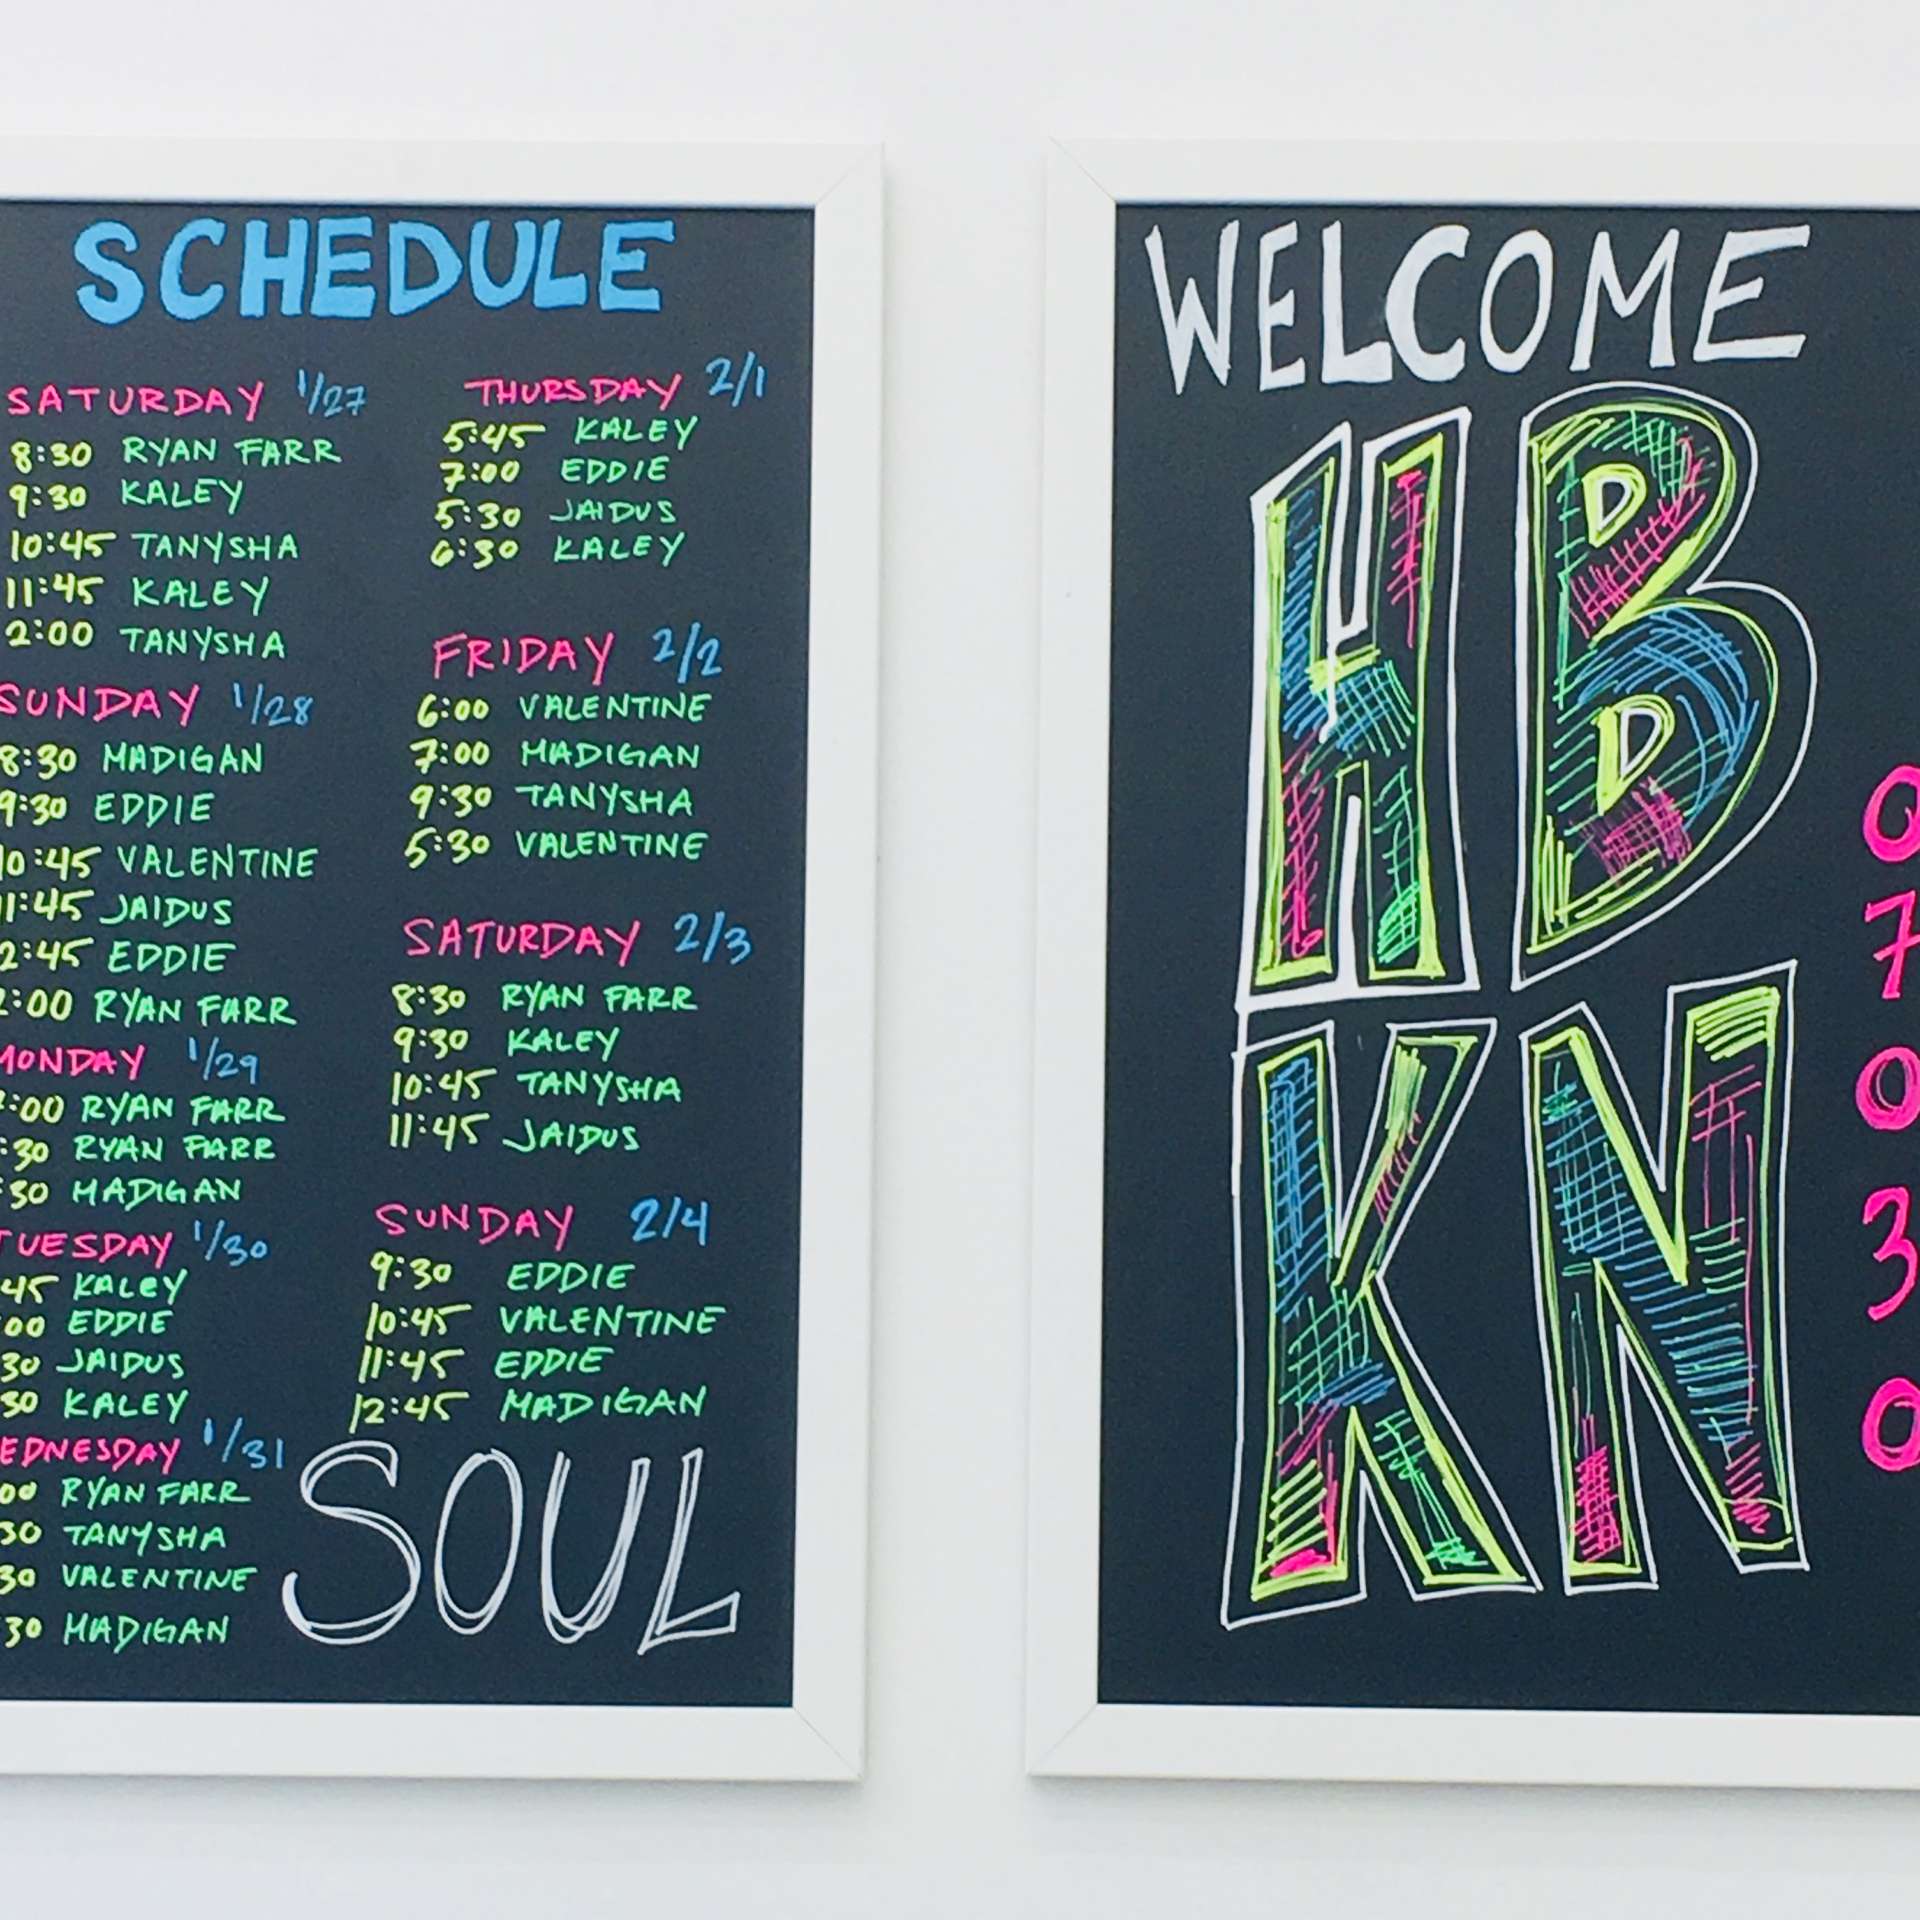 SoulCycle-Hoboken-HBKN-Fitness-Class-Opening-Day-Chalkboard-Schedule-Genna-Rossi